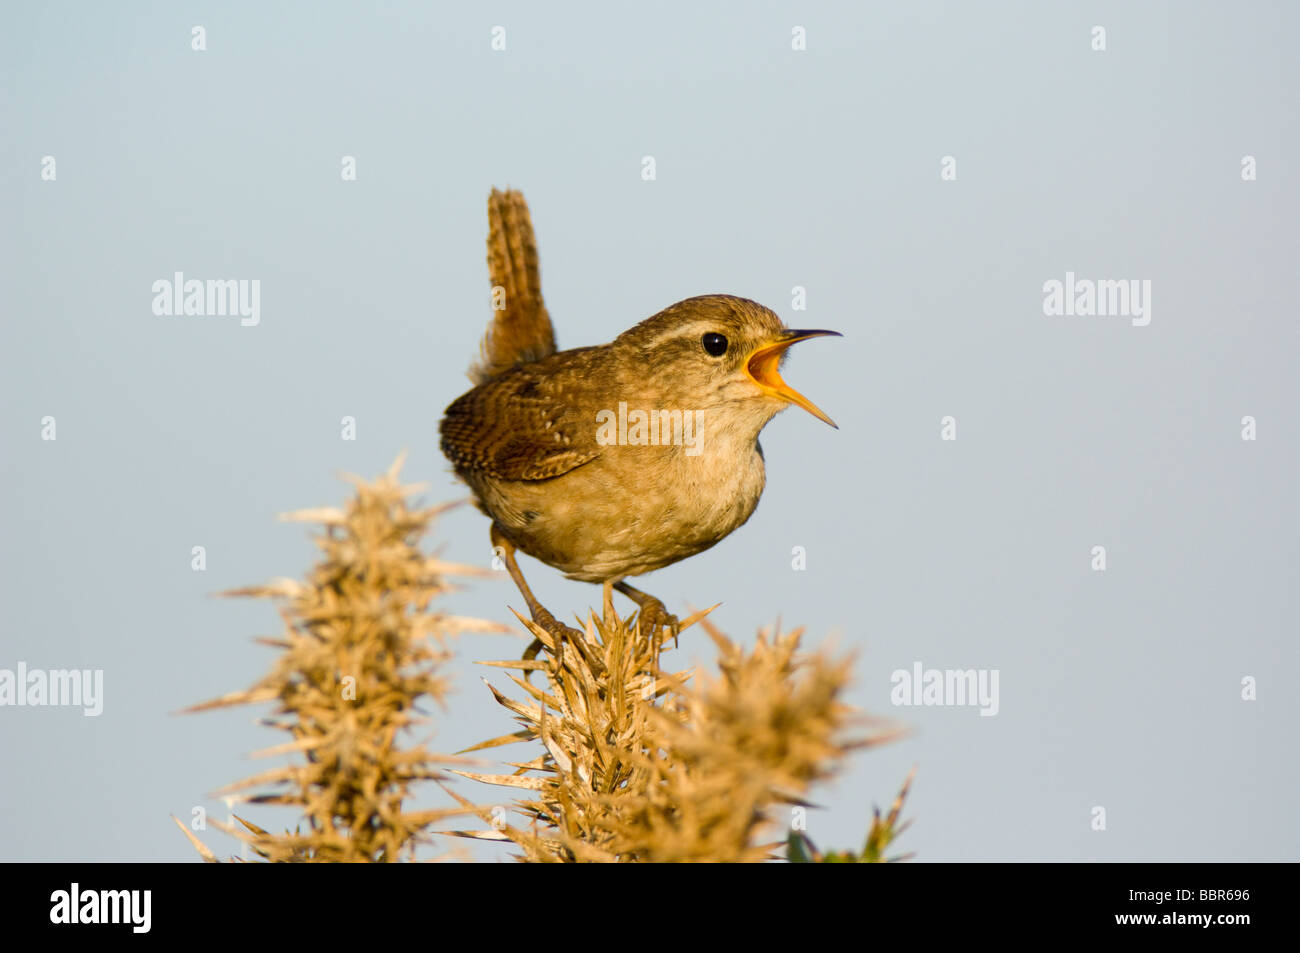 Wren Troglodytes troglodytes perched on and singing from a gorse bush Ulex europaeus against a blue sky Stock Photo